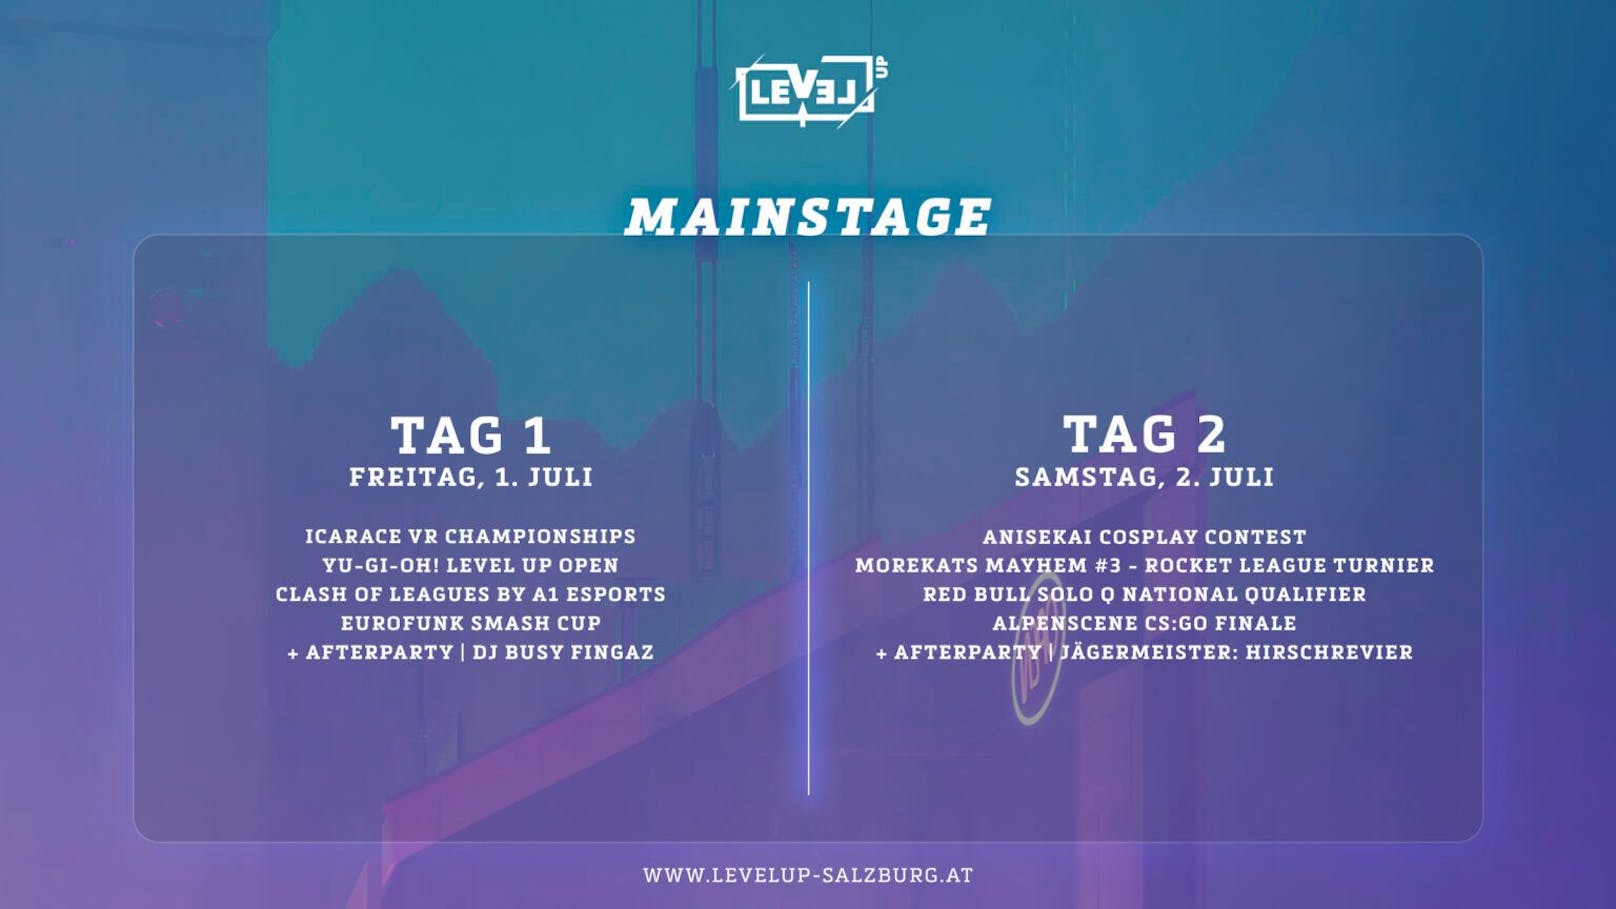 LEVEL UP für die Mainstage: eSports meets Card Gaming meets Cosplay meets Party! 